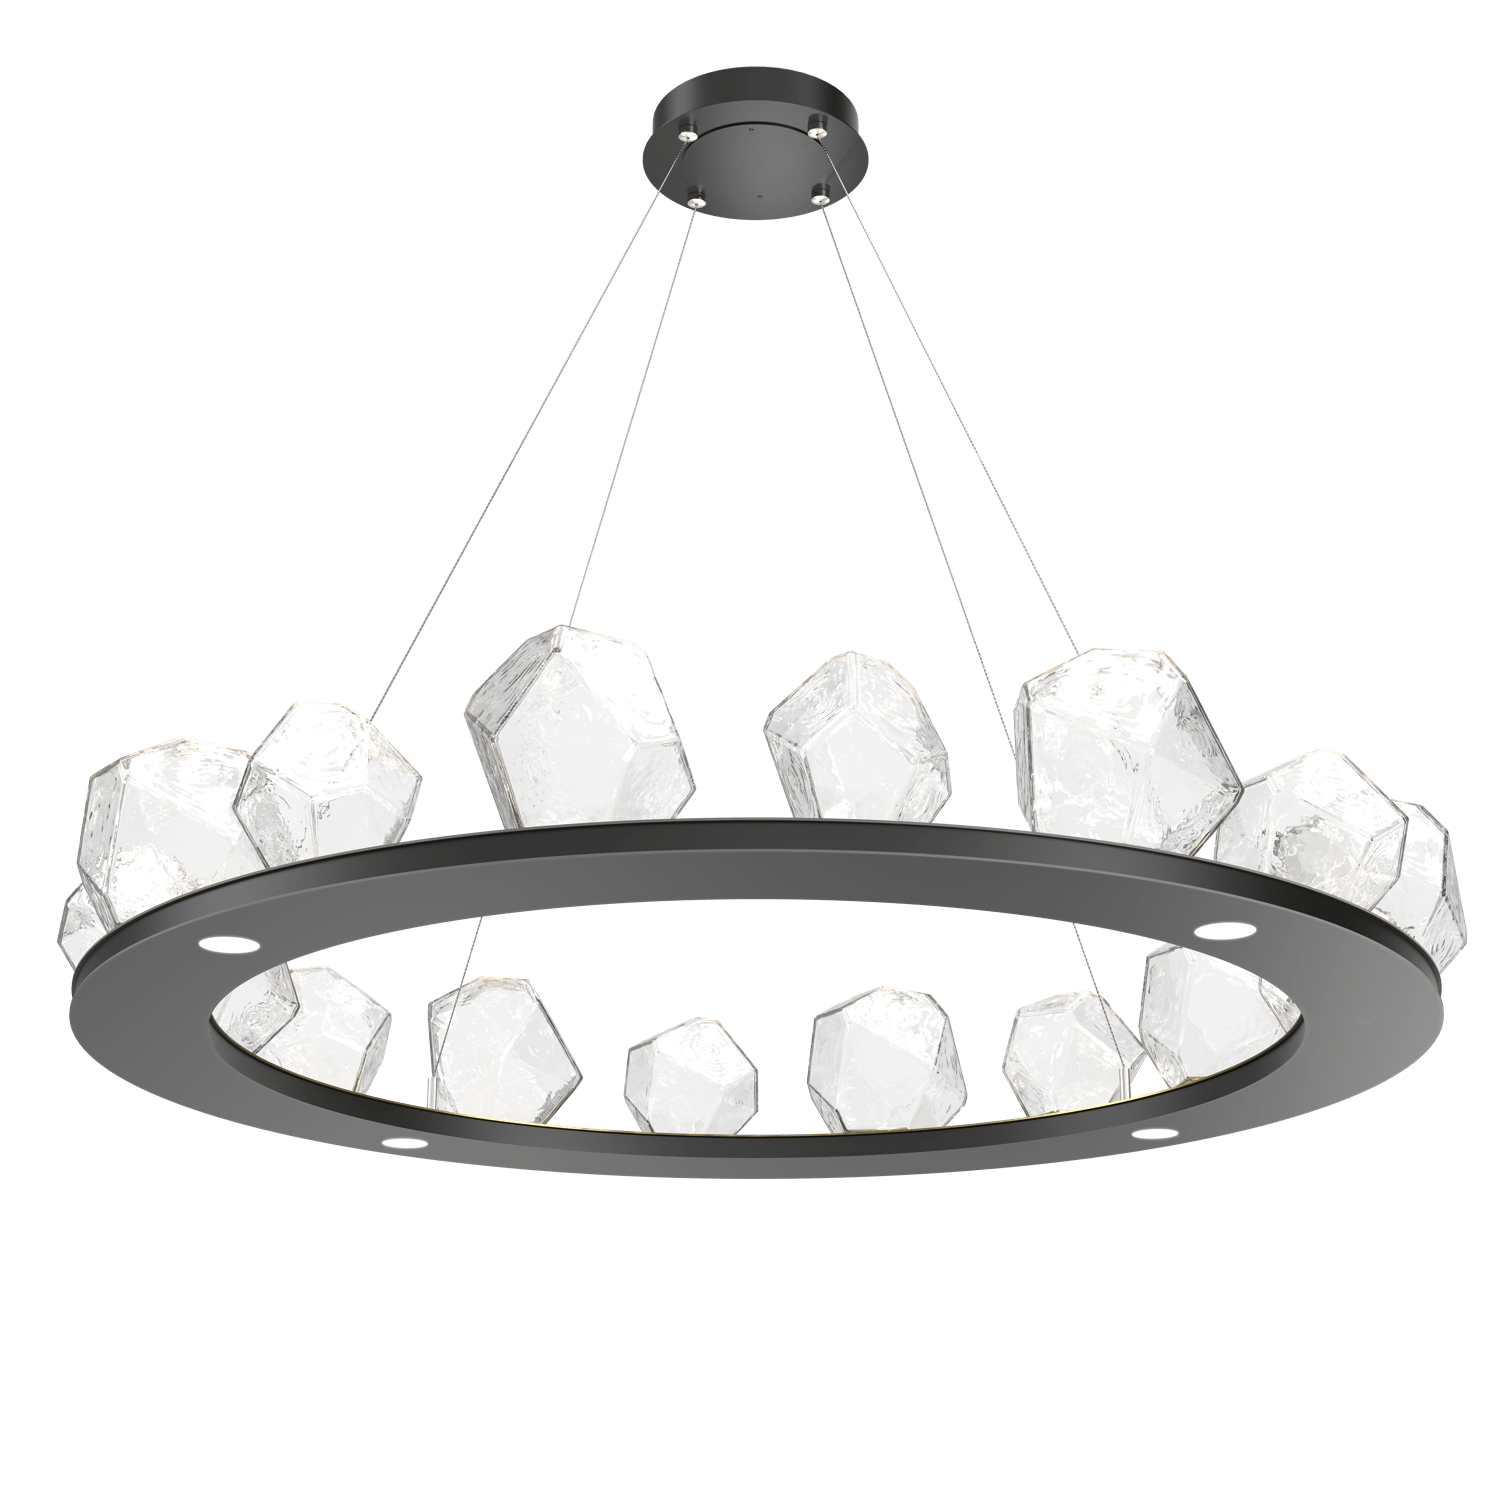 CHB0039-0D-MB-C-Hammerton-Studio-Gem-48-inch-ring-chandelier-with-matte-black-finish-and-clear-blown-glass-shades-and-LED-lamping